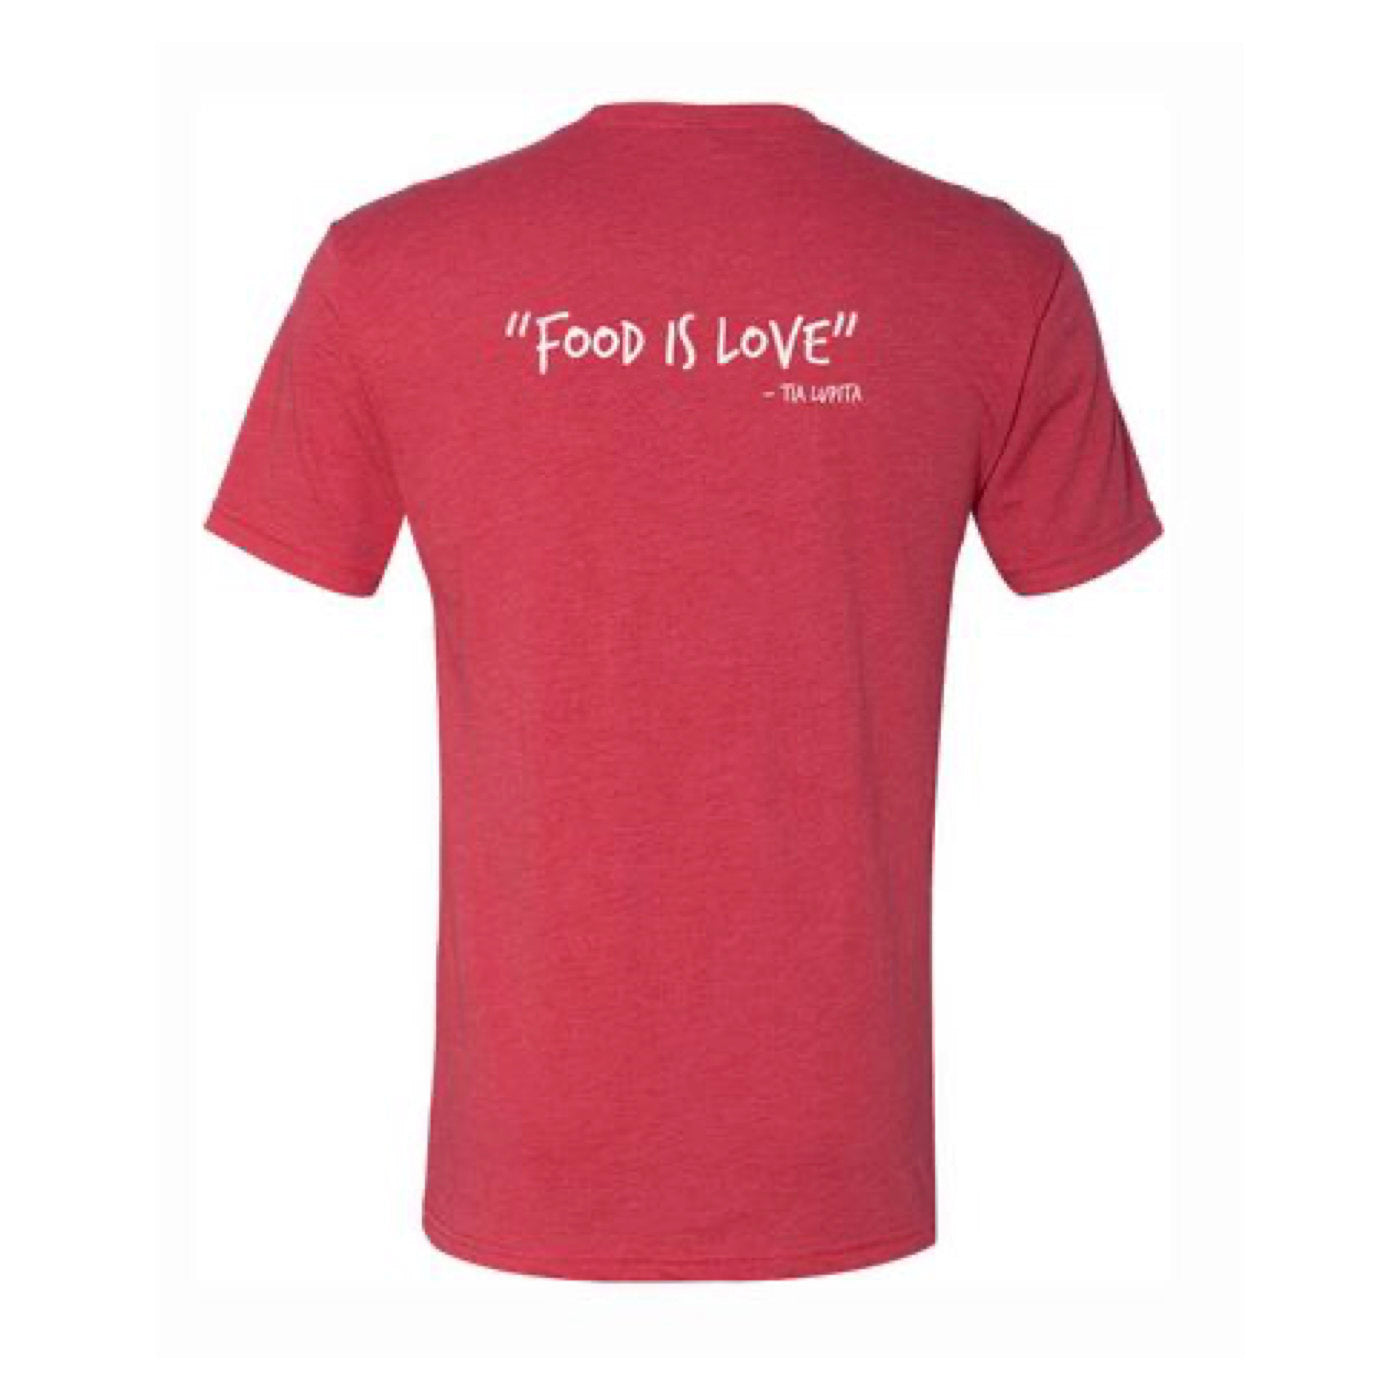 Tia Lupita Shirt showing the back text that says Food Is Love